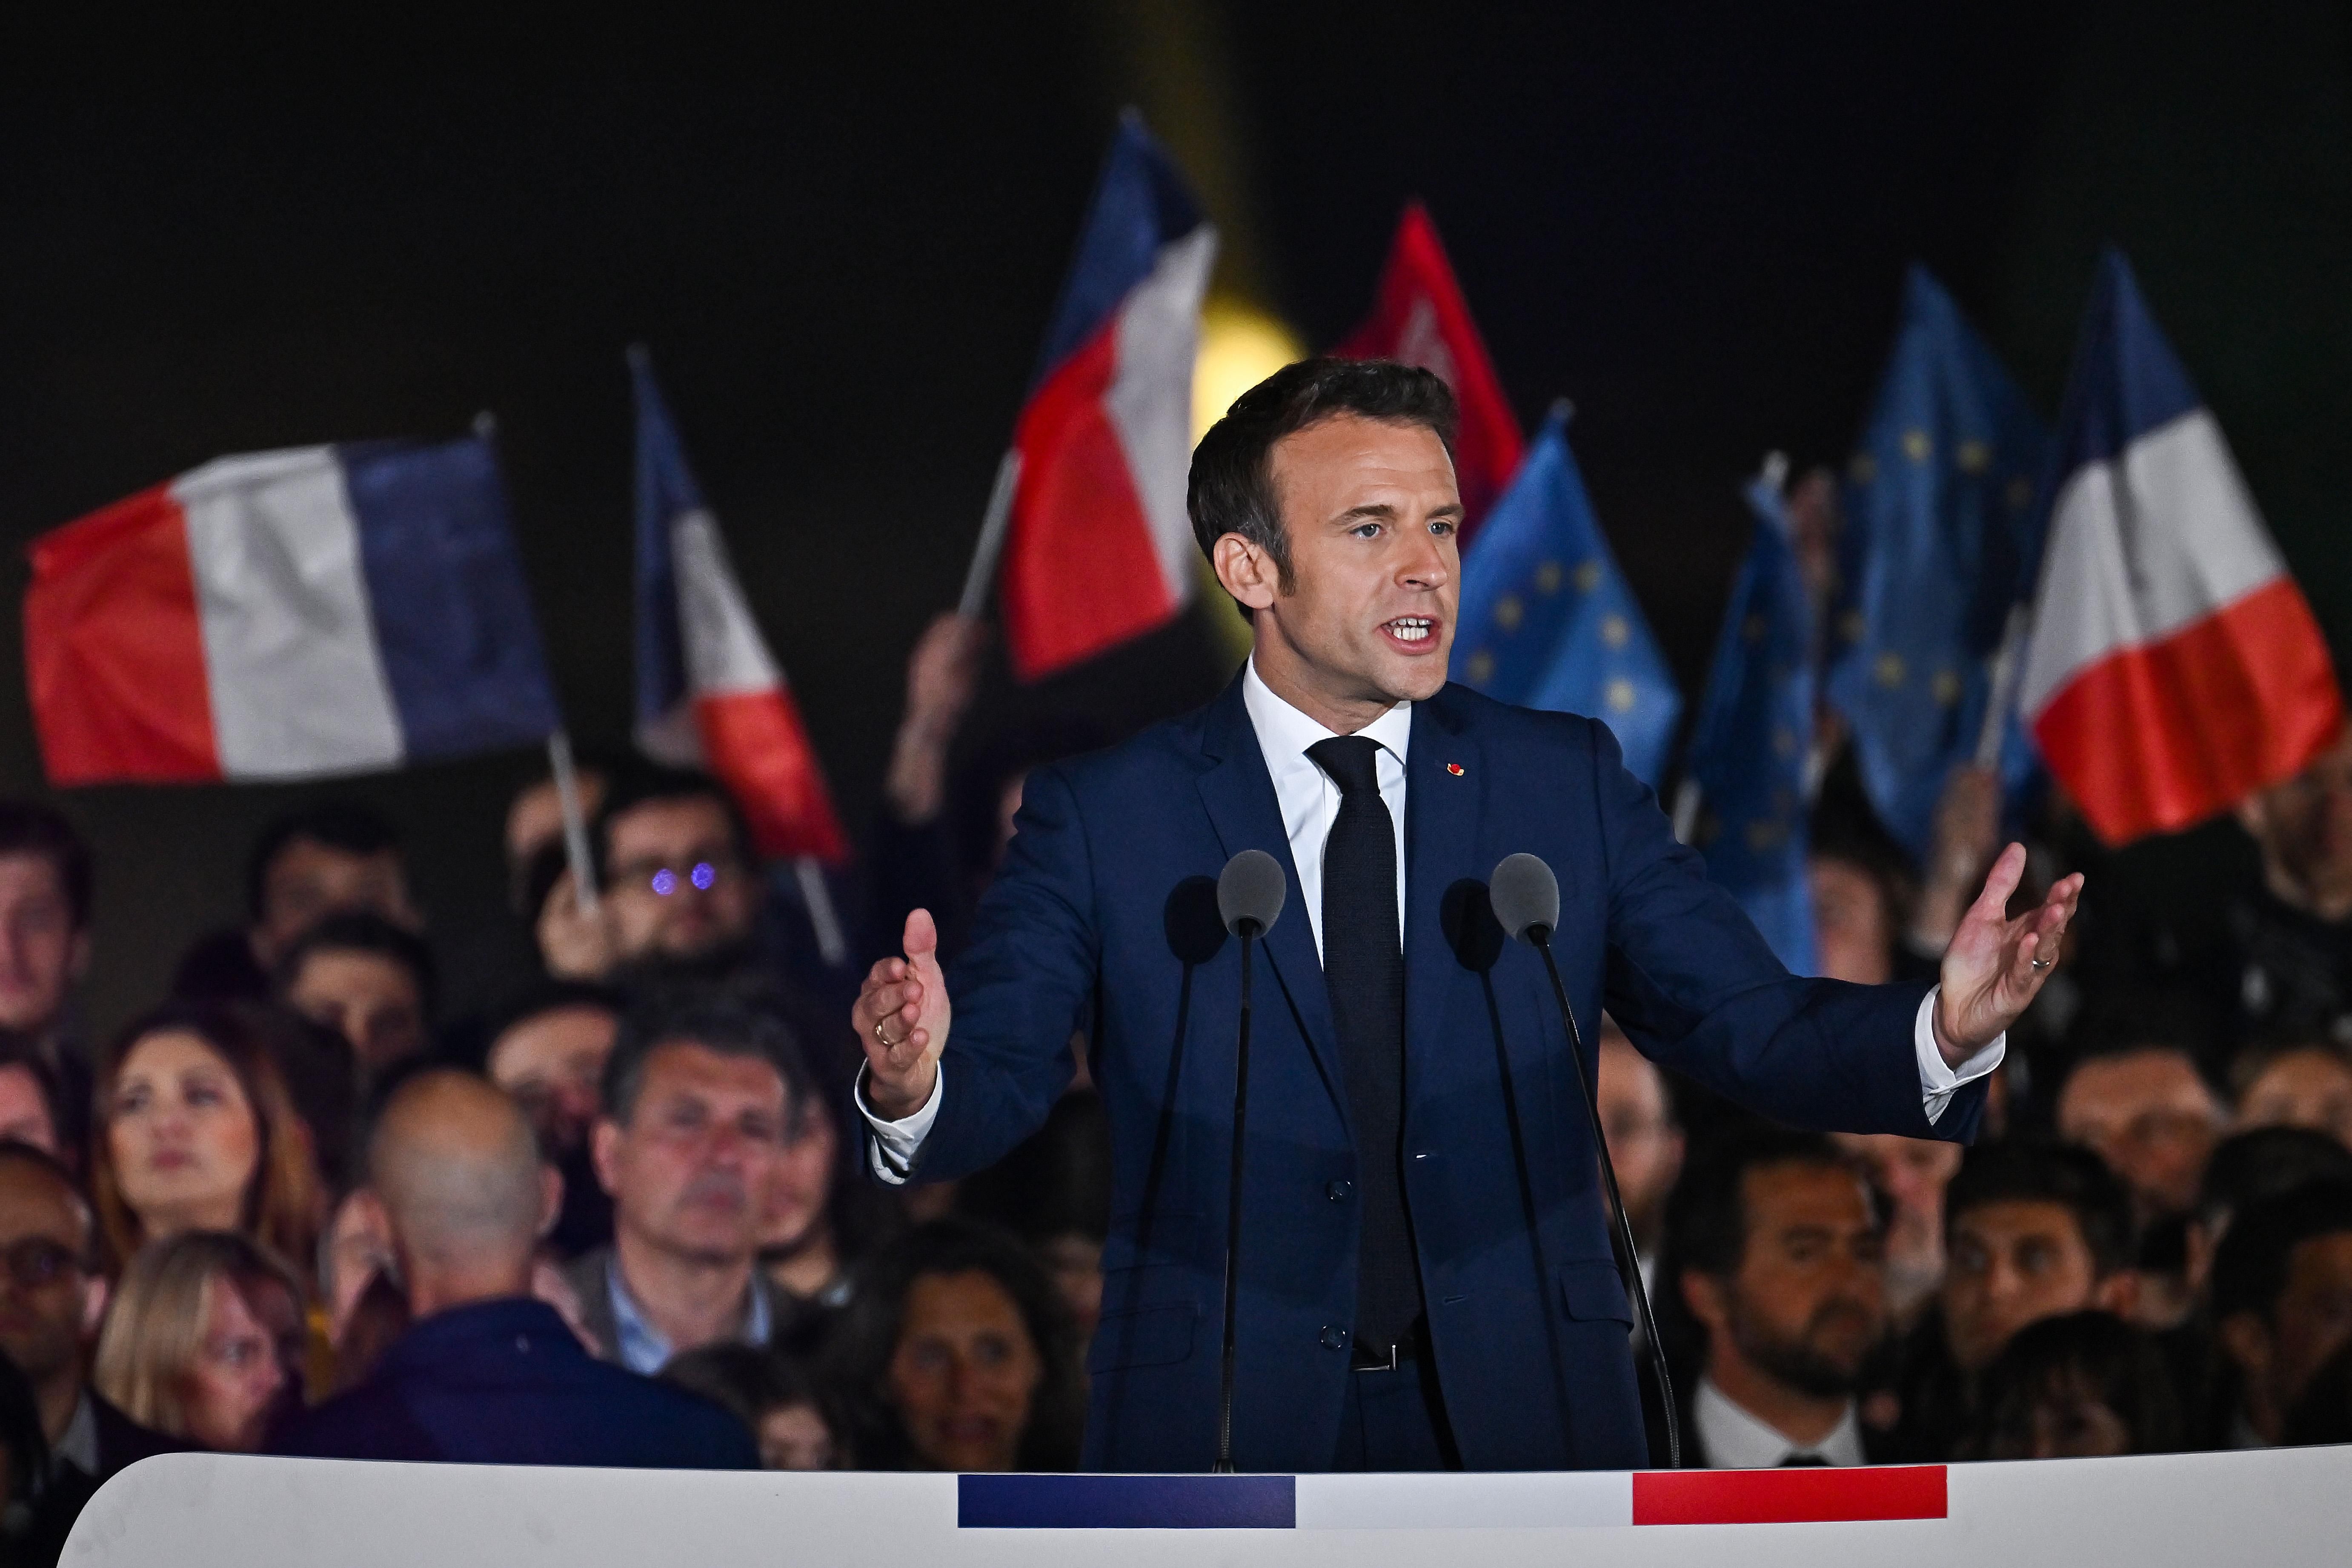 Neoliberal French President Emmanuel Macron speaks in Paris on April 24, 2022 after beating far-right candidate Marine Le Pen for a second five-year term. 